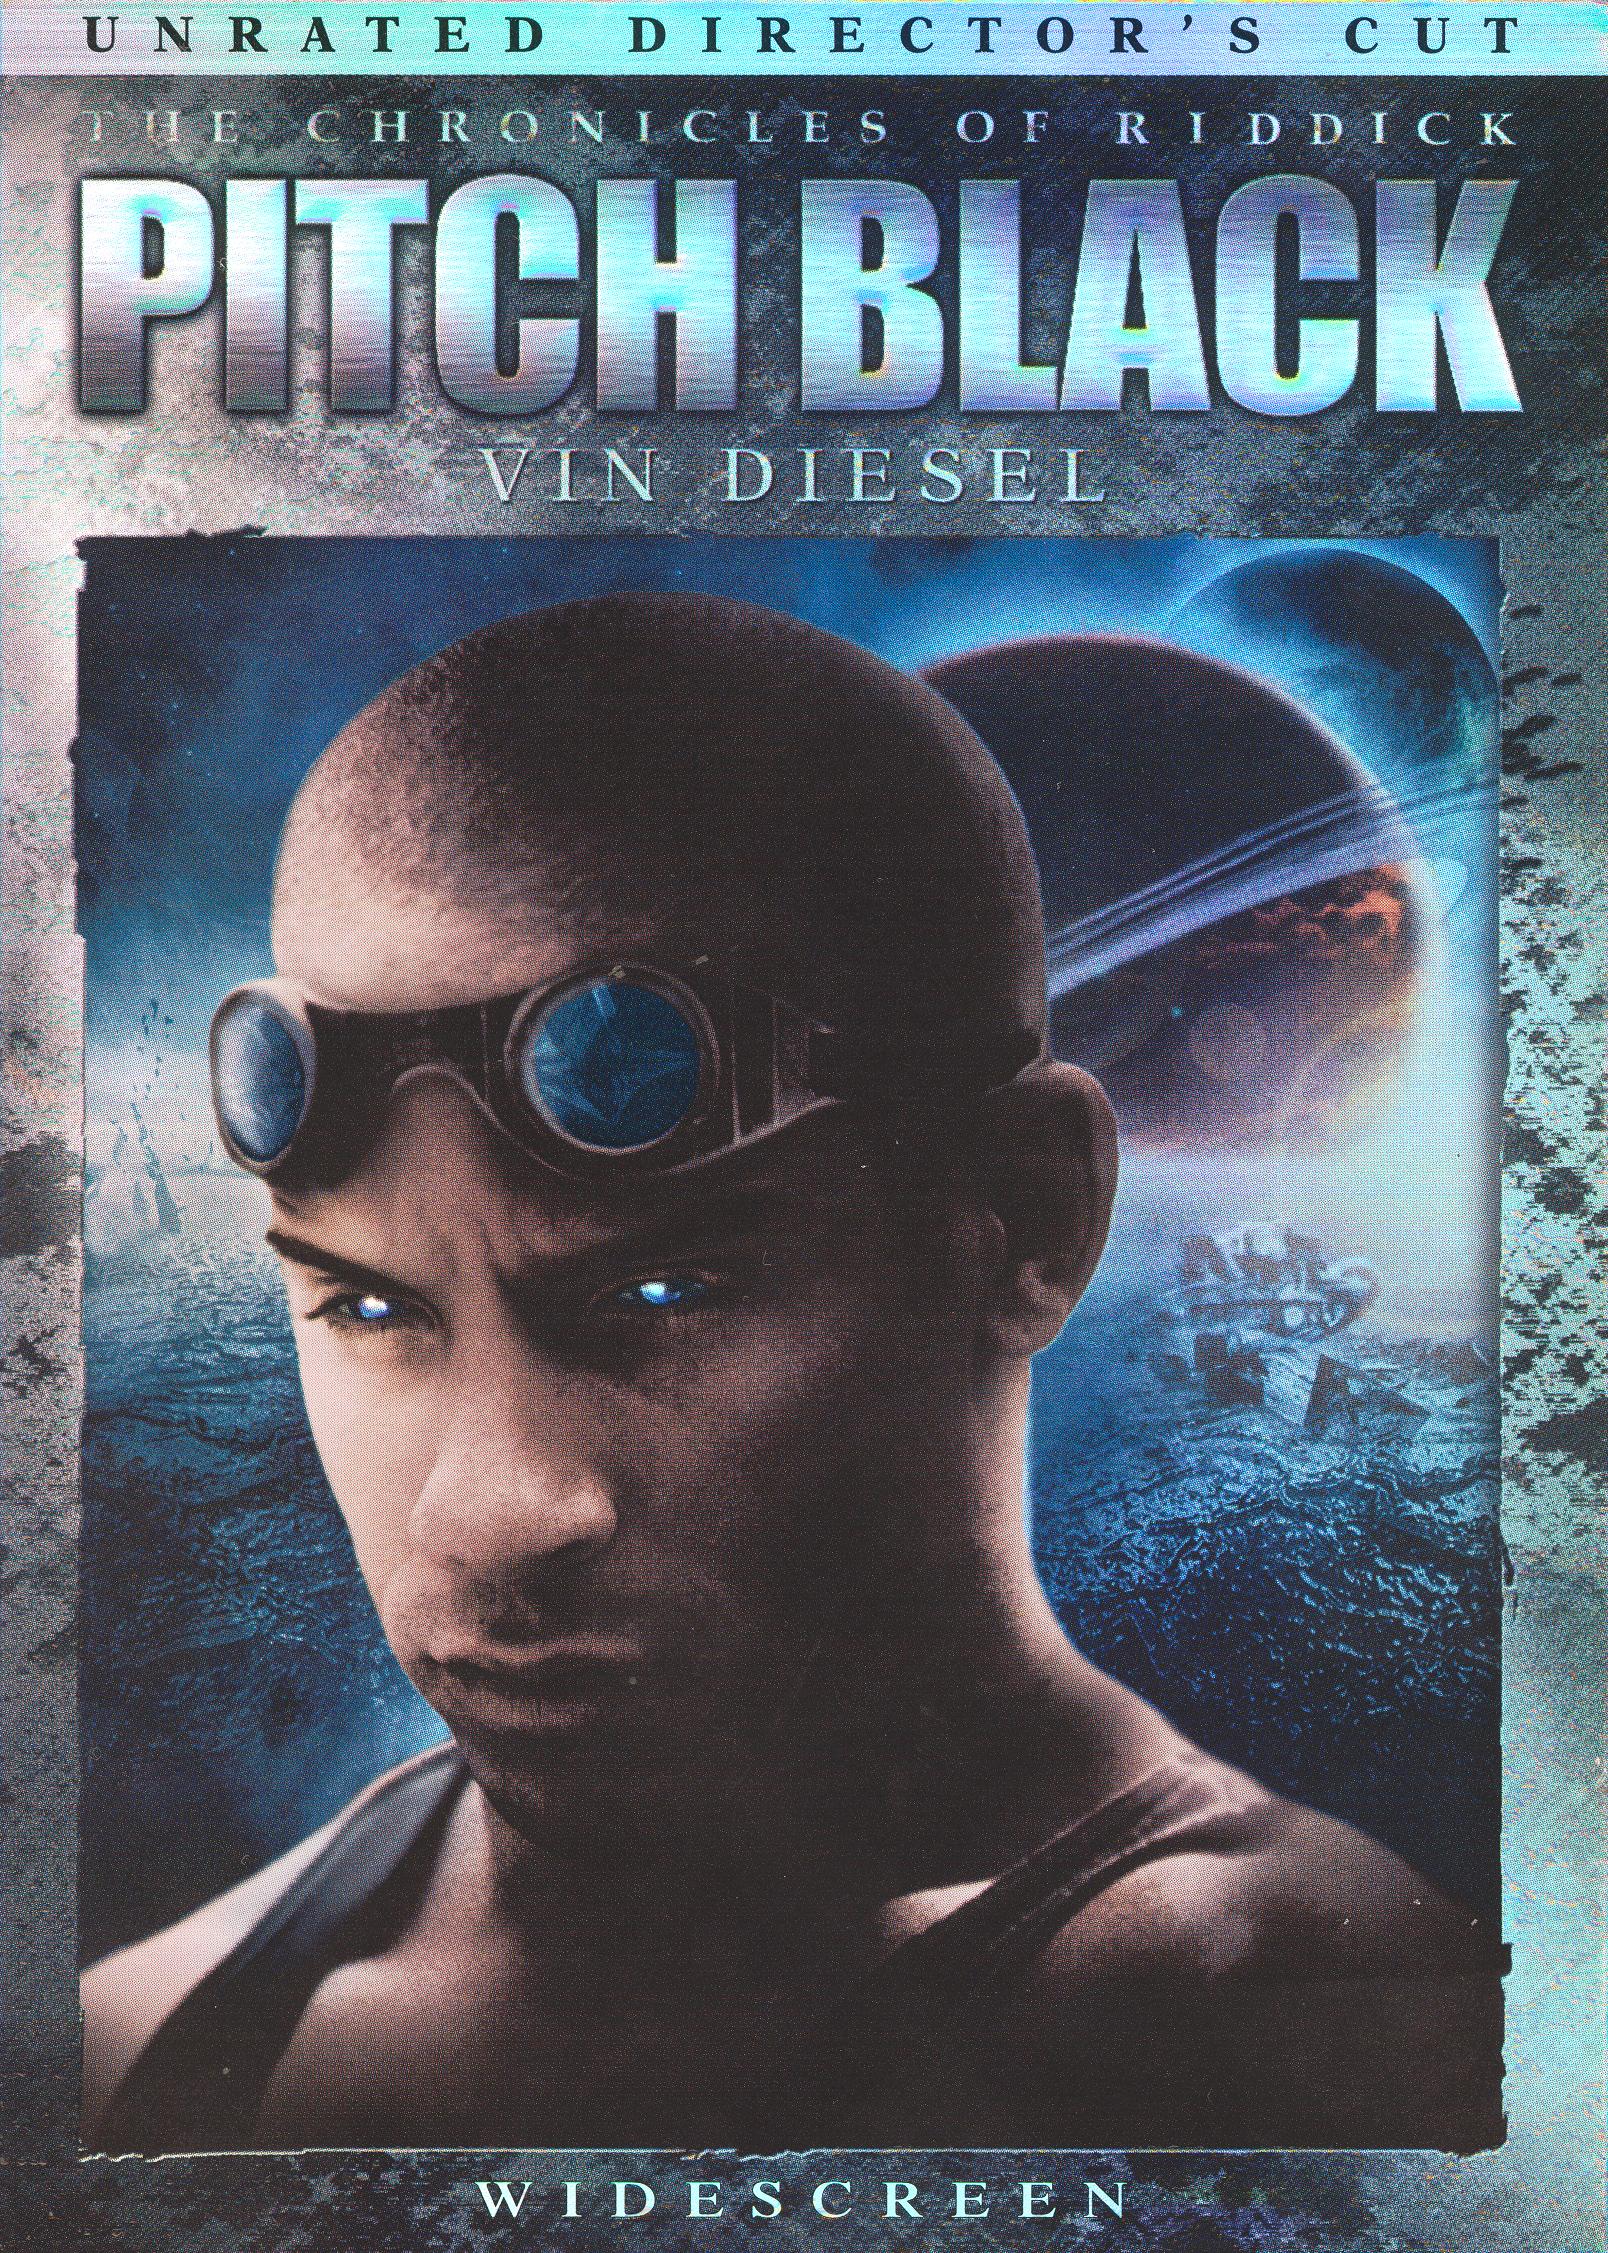 Chronicles of Riddick: Pitch Black [WS Unrated Director's Cut] cover art